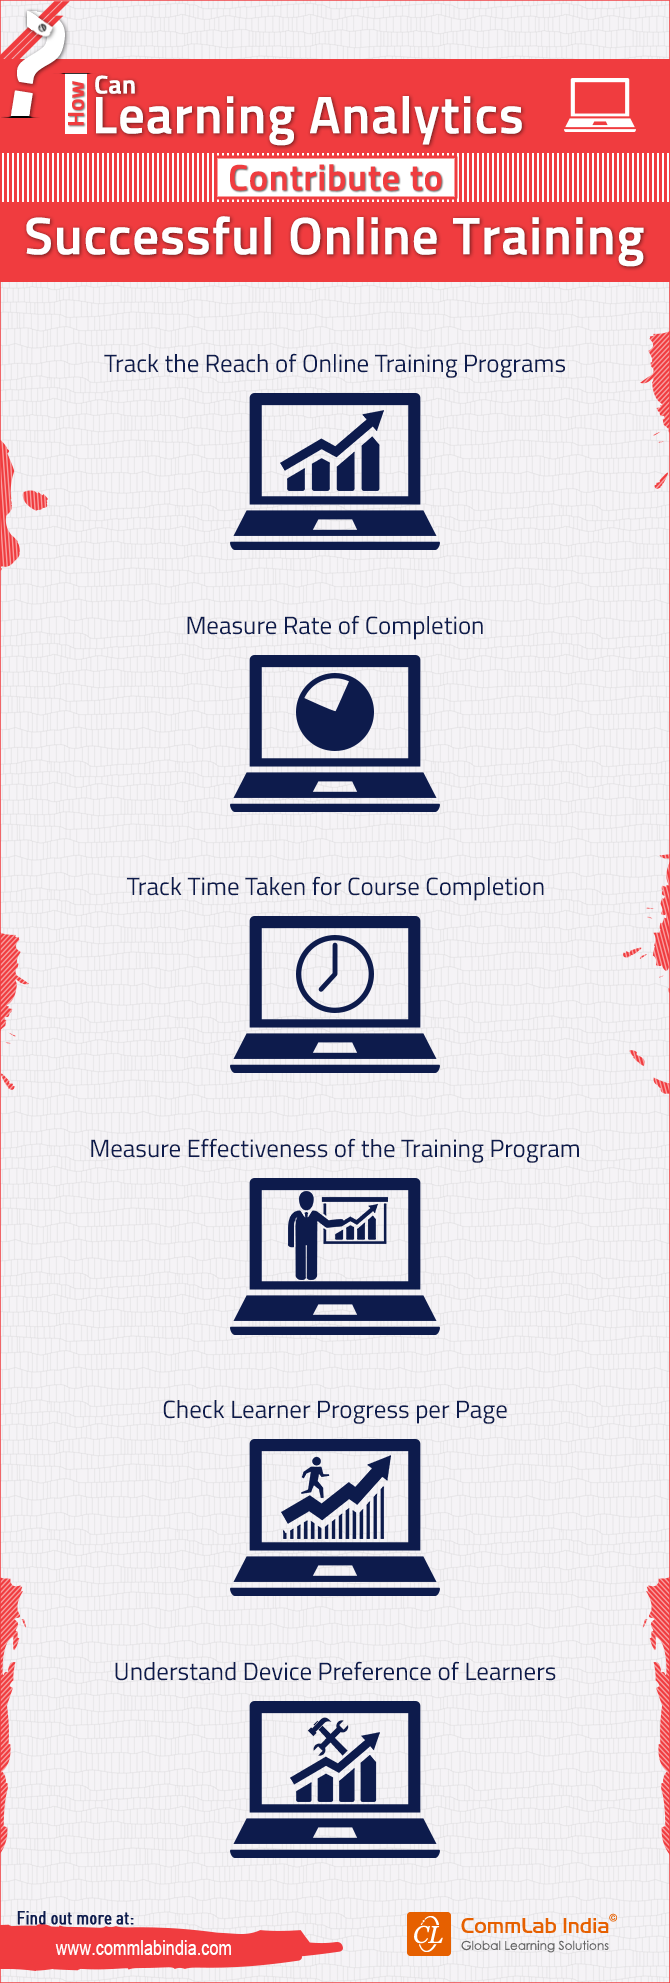 How Can Learning Analytics Contribute to Successful Online Training [Infographic]